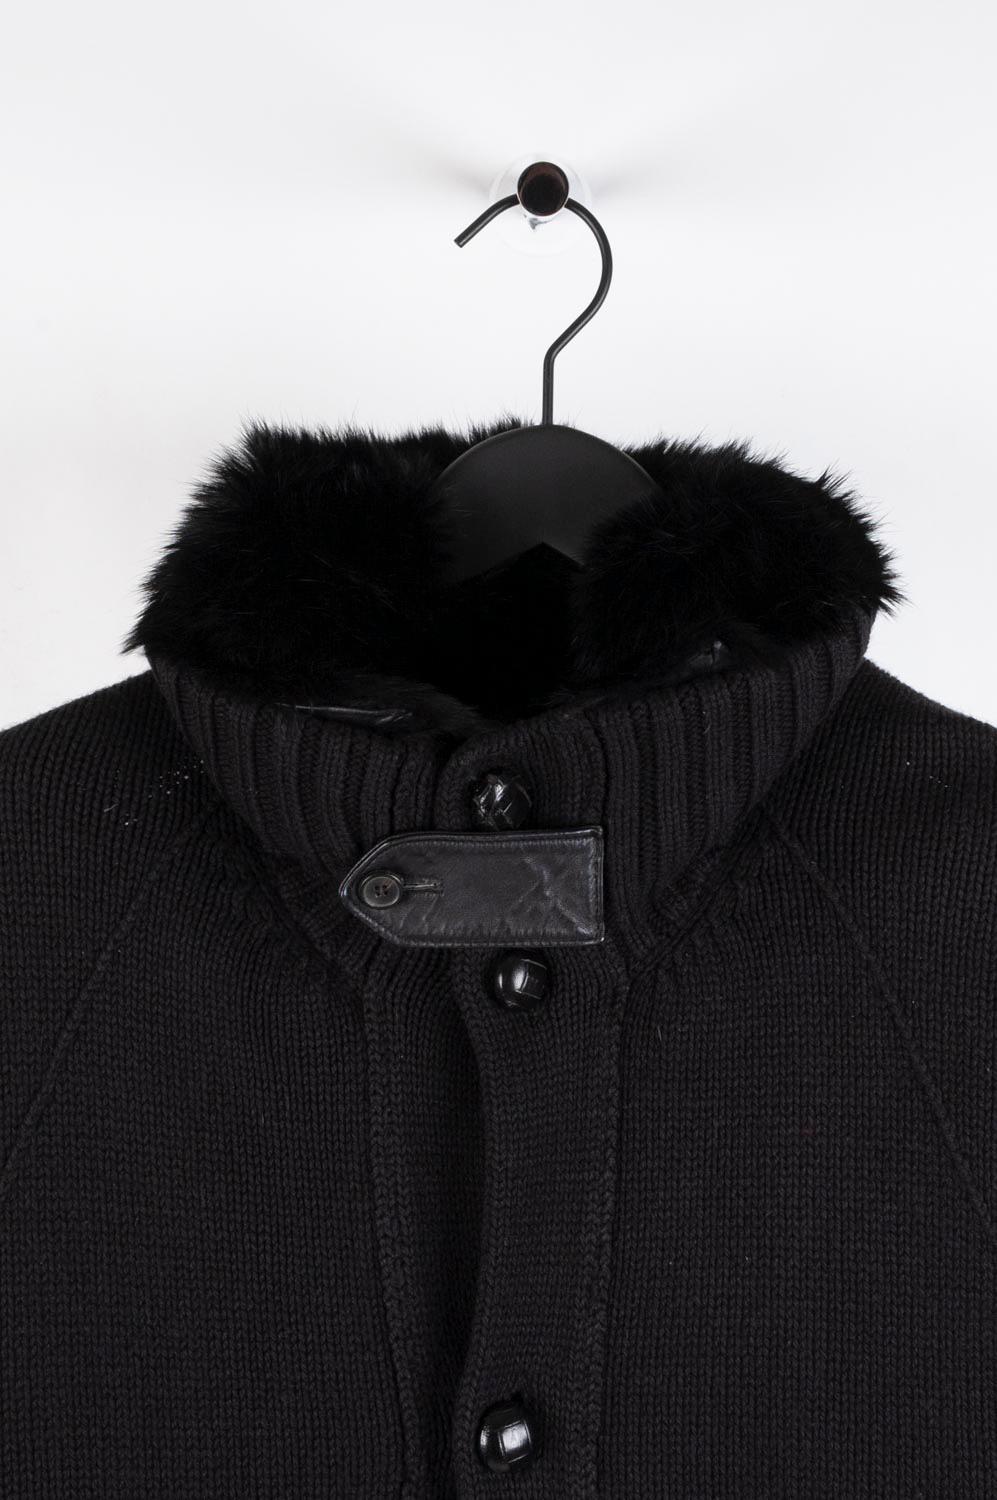 Item for sale is 100% genuine Yves Saint Laurent Removable by Tom Ford Cardigan, S462
Color: Black
(An actual color may a bit vary due to individual computer screen interpretation)
Material: 100% wool
Tag size: M 
This sweater is great quality item.